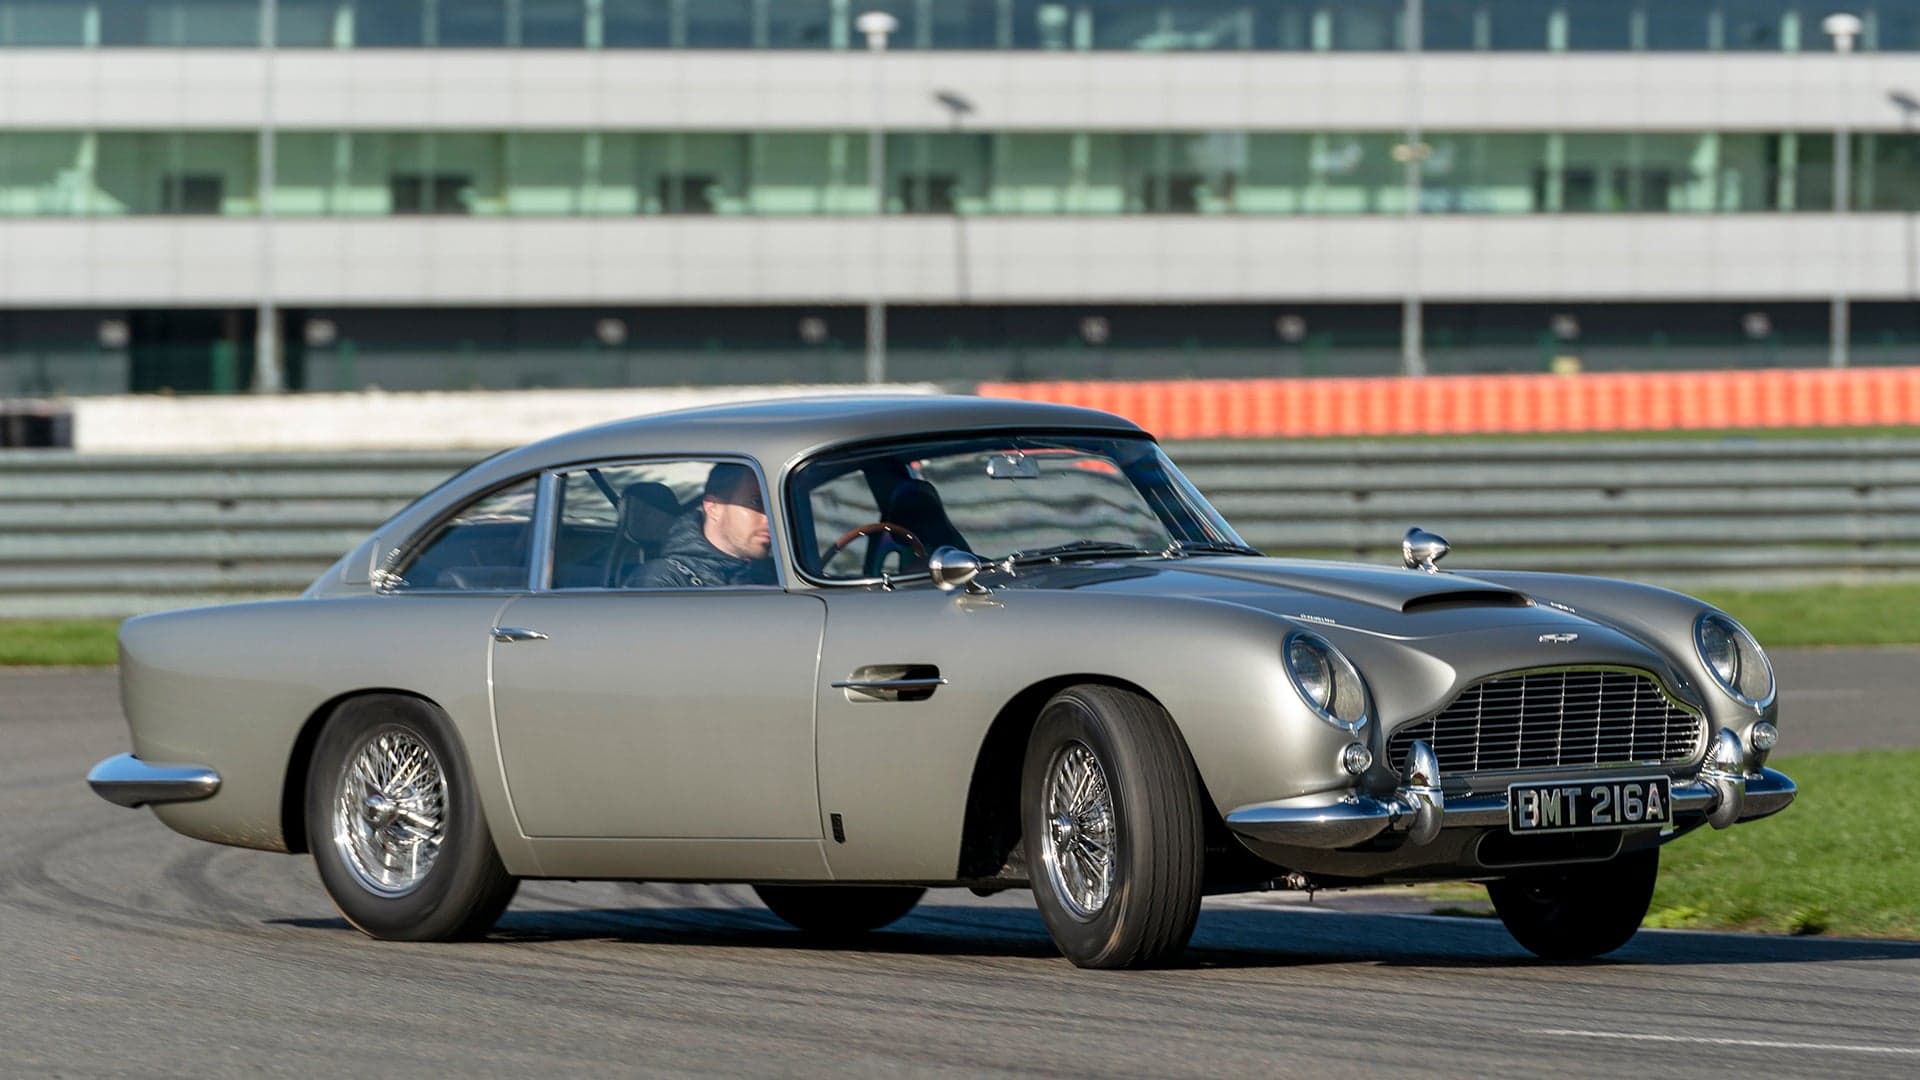 We Drove The Carbon Fiber, Stick Shift Aston Martin DB5 Stunt Car from No Time To Die